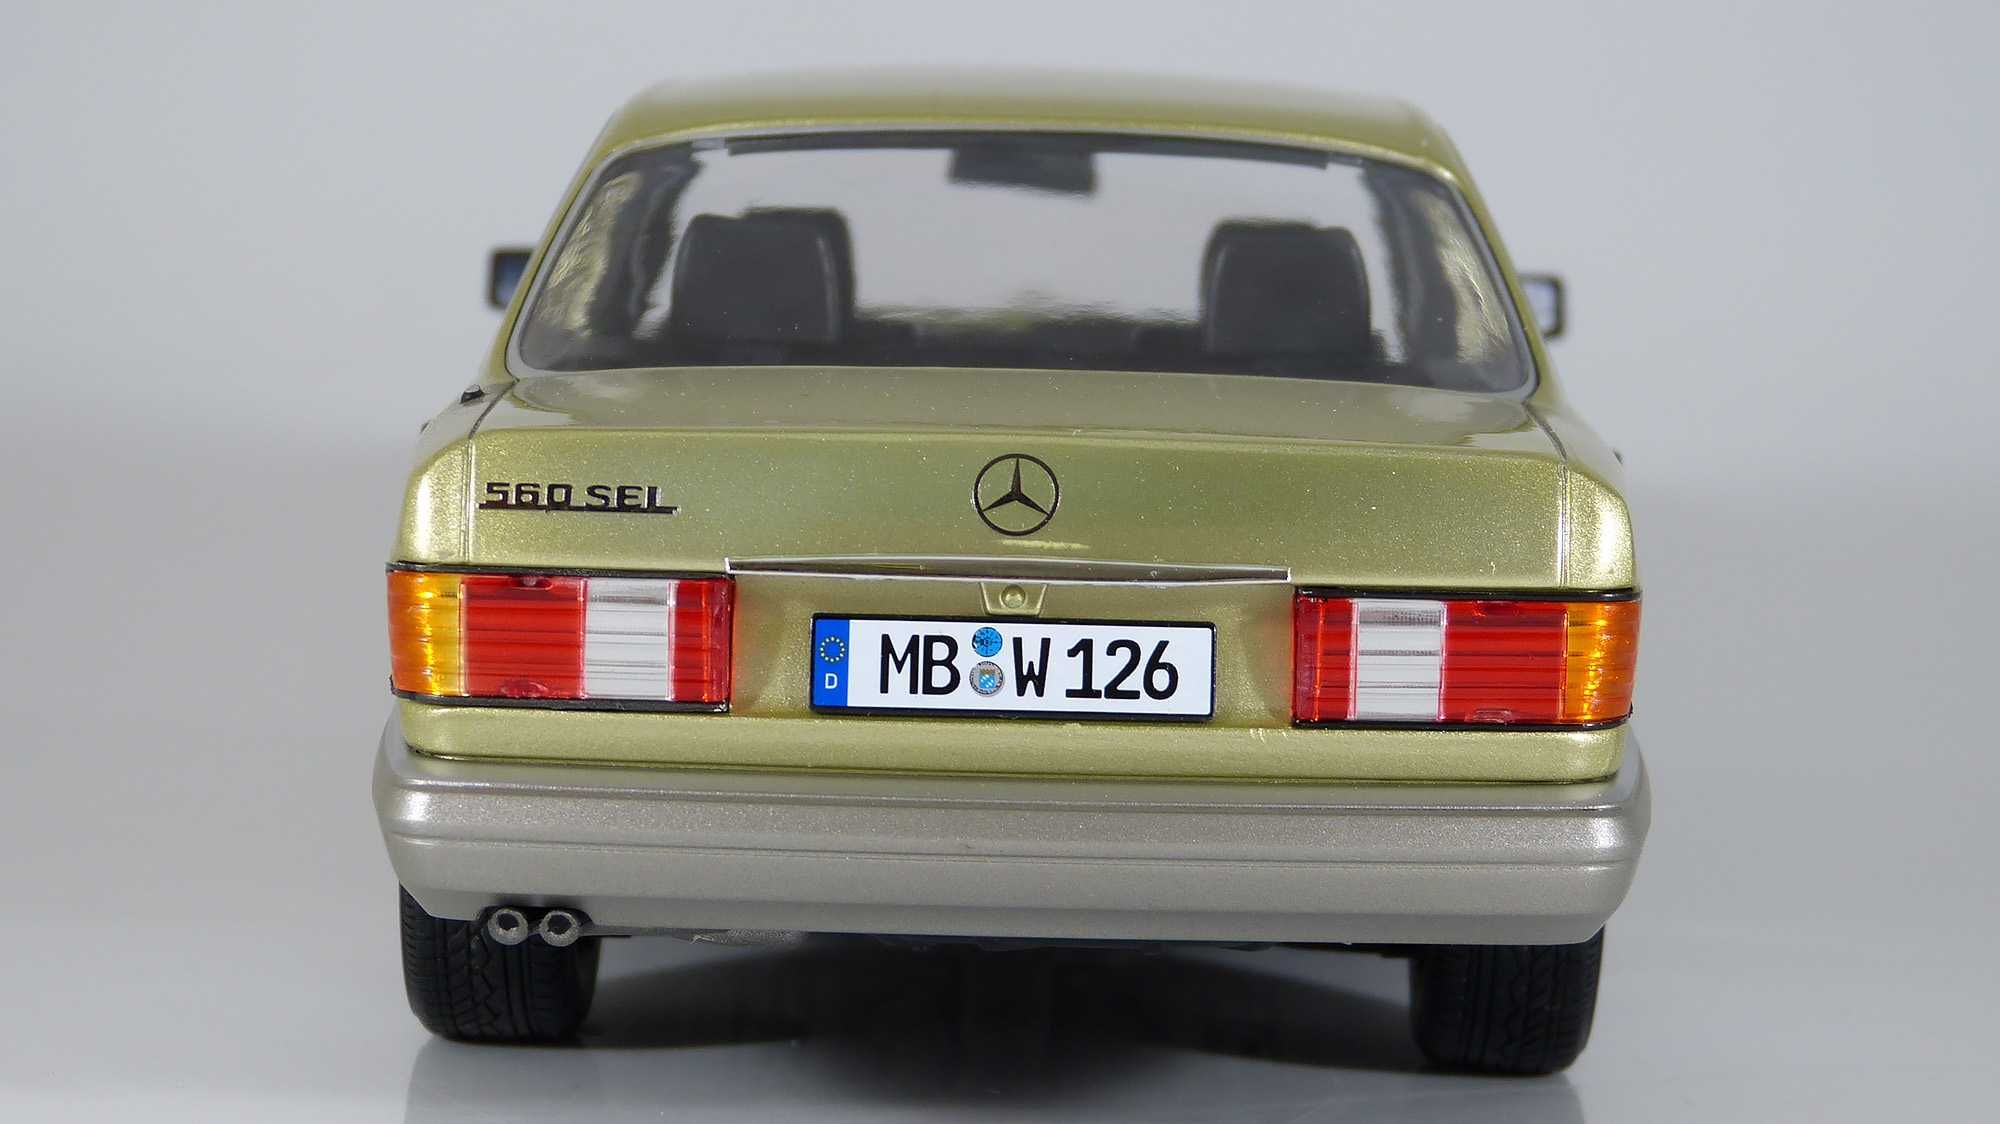 Model 1:18 iScale Mercedes-Benz 560 SEL S-class (W126) 1985 green/grey